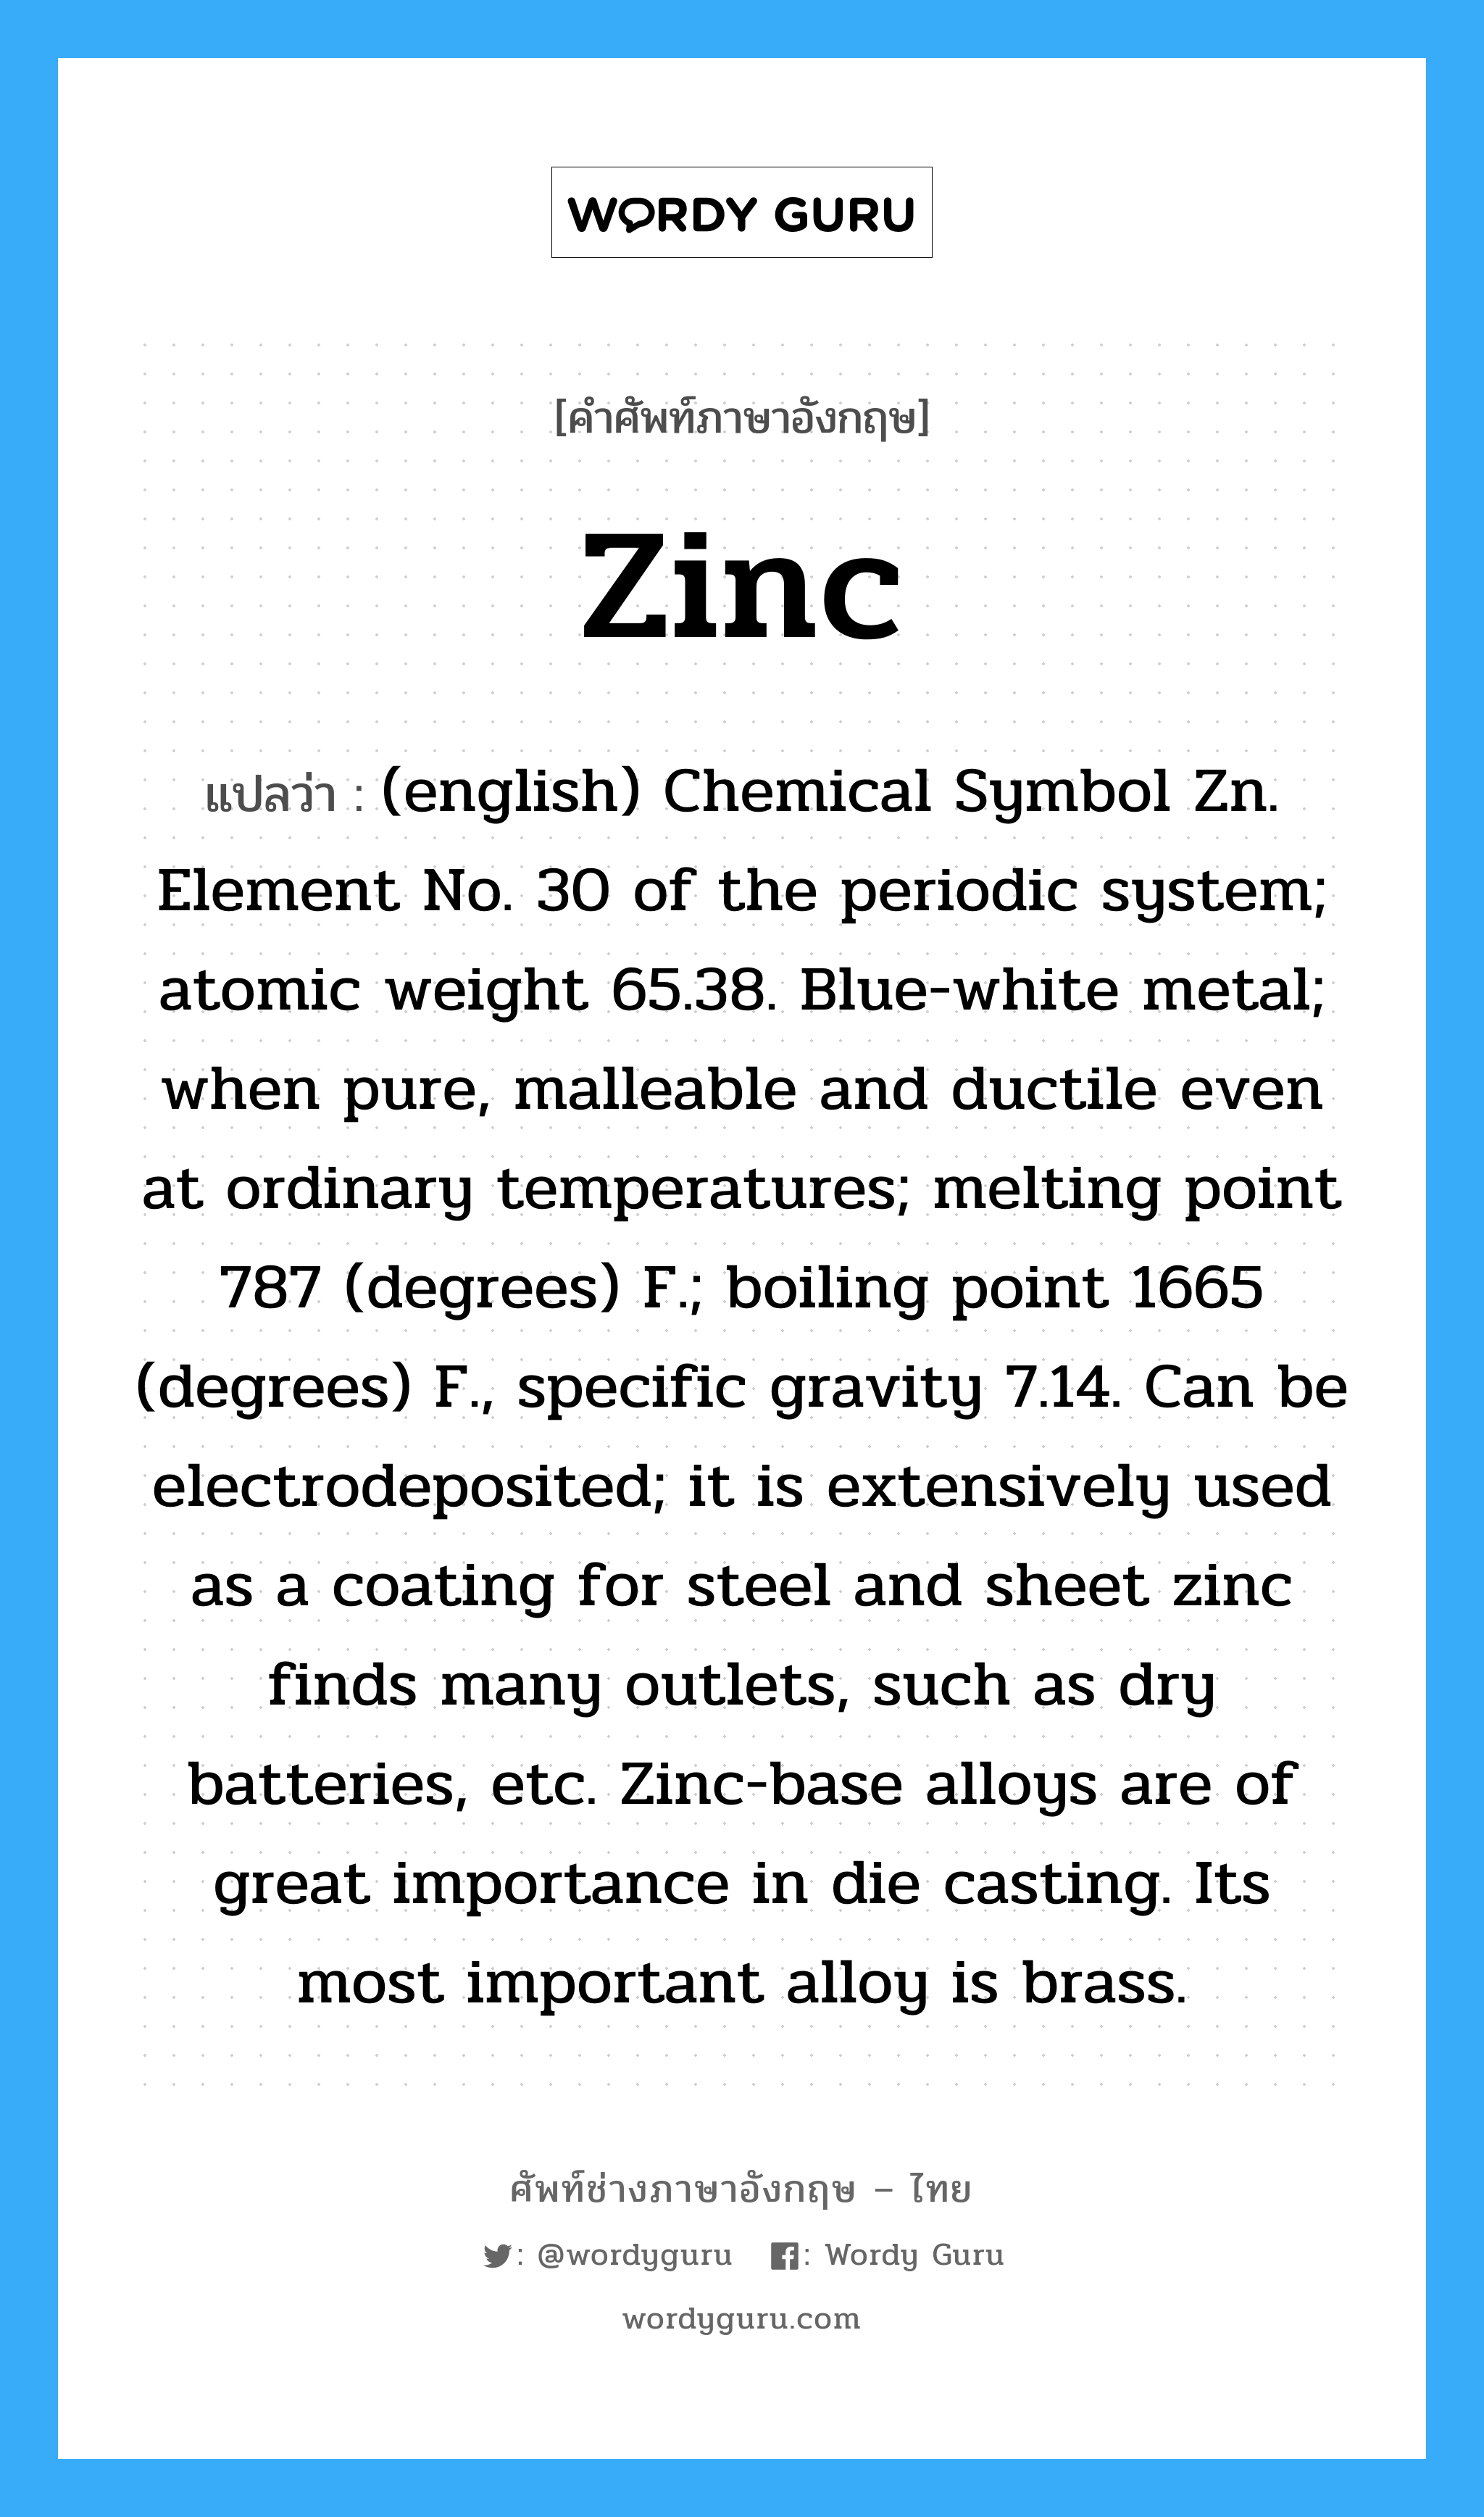 (english) Chemical Symbol Zn. Element No. 30 of the periodic system; atomic weight 65.38. Blue-white metal; when pure, malleable and ductile even at ordinary temperatures; melting point 787 (degrees) F.; boiling point 1665 (degrees) F., specific gravity 7.14. Can be electrodeposited; it is extensively used as a coating for steel and sheet zinc finds many outlets, such as dry batteries, etc. Zinc-base alloys are of great importance in die casting. Its most important alloy is brass. ภาษาอังกฤษ?, คำศัพท์ช่างภาษาอังกฤษ - ไทย (english) Chemical Symbol Zn. Element No. 30 of the periodic system; atomic weight 65.38. Blue-white metal; when pure, malleable and ductile even at ordinary temperatures; melting point 787 (degrees) F.; boiling point 1665 (degrees) F., specific gravity 7.14. Can be electrodeposited; it is extensively used as a coating for steel and sheet zinc finds many outlets, such as dry batteries, etc. Zinc-base alloys are of great importance in die casting. Its most important alloy is brass. คำศัพท์ภาษาอังกฤษ (english) Chemical Symbol Zn. Element No. 30 of the periodic system; atomic weight 65.38. Blue-white metal; when pure, malleable and ductile even at ordinary temperatures; melting point 787 (degrees) F.; boiling point 1665 (degrees) F., specific gravity 7.14. Can be electrodeposited; it is extensively used as a coating for steel and sheet zinc finds many outlets, such as dry batteries, etc. Zinc-base alloys are of great importance in die casting. Its most important alloy is brass. แปลว่า Zinc